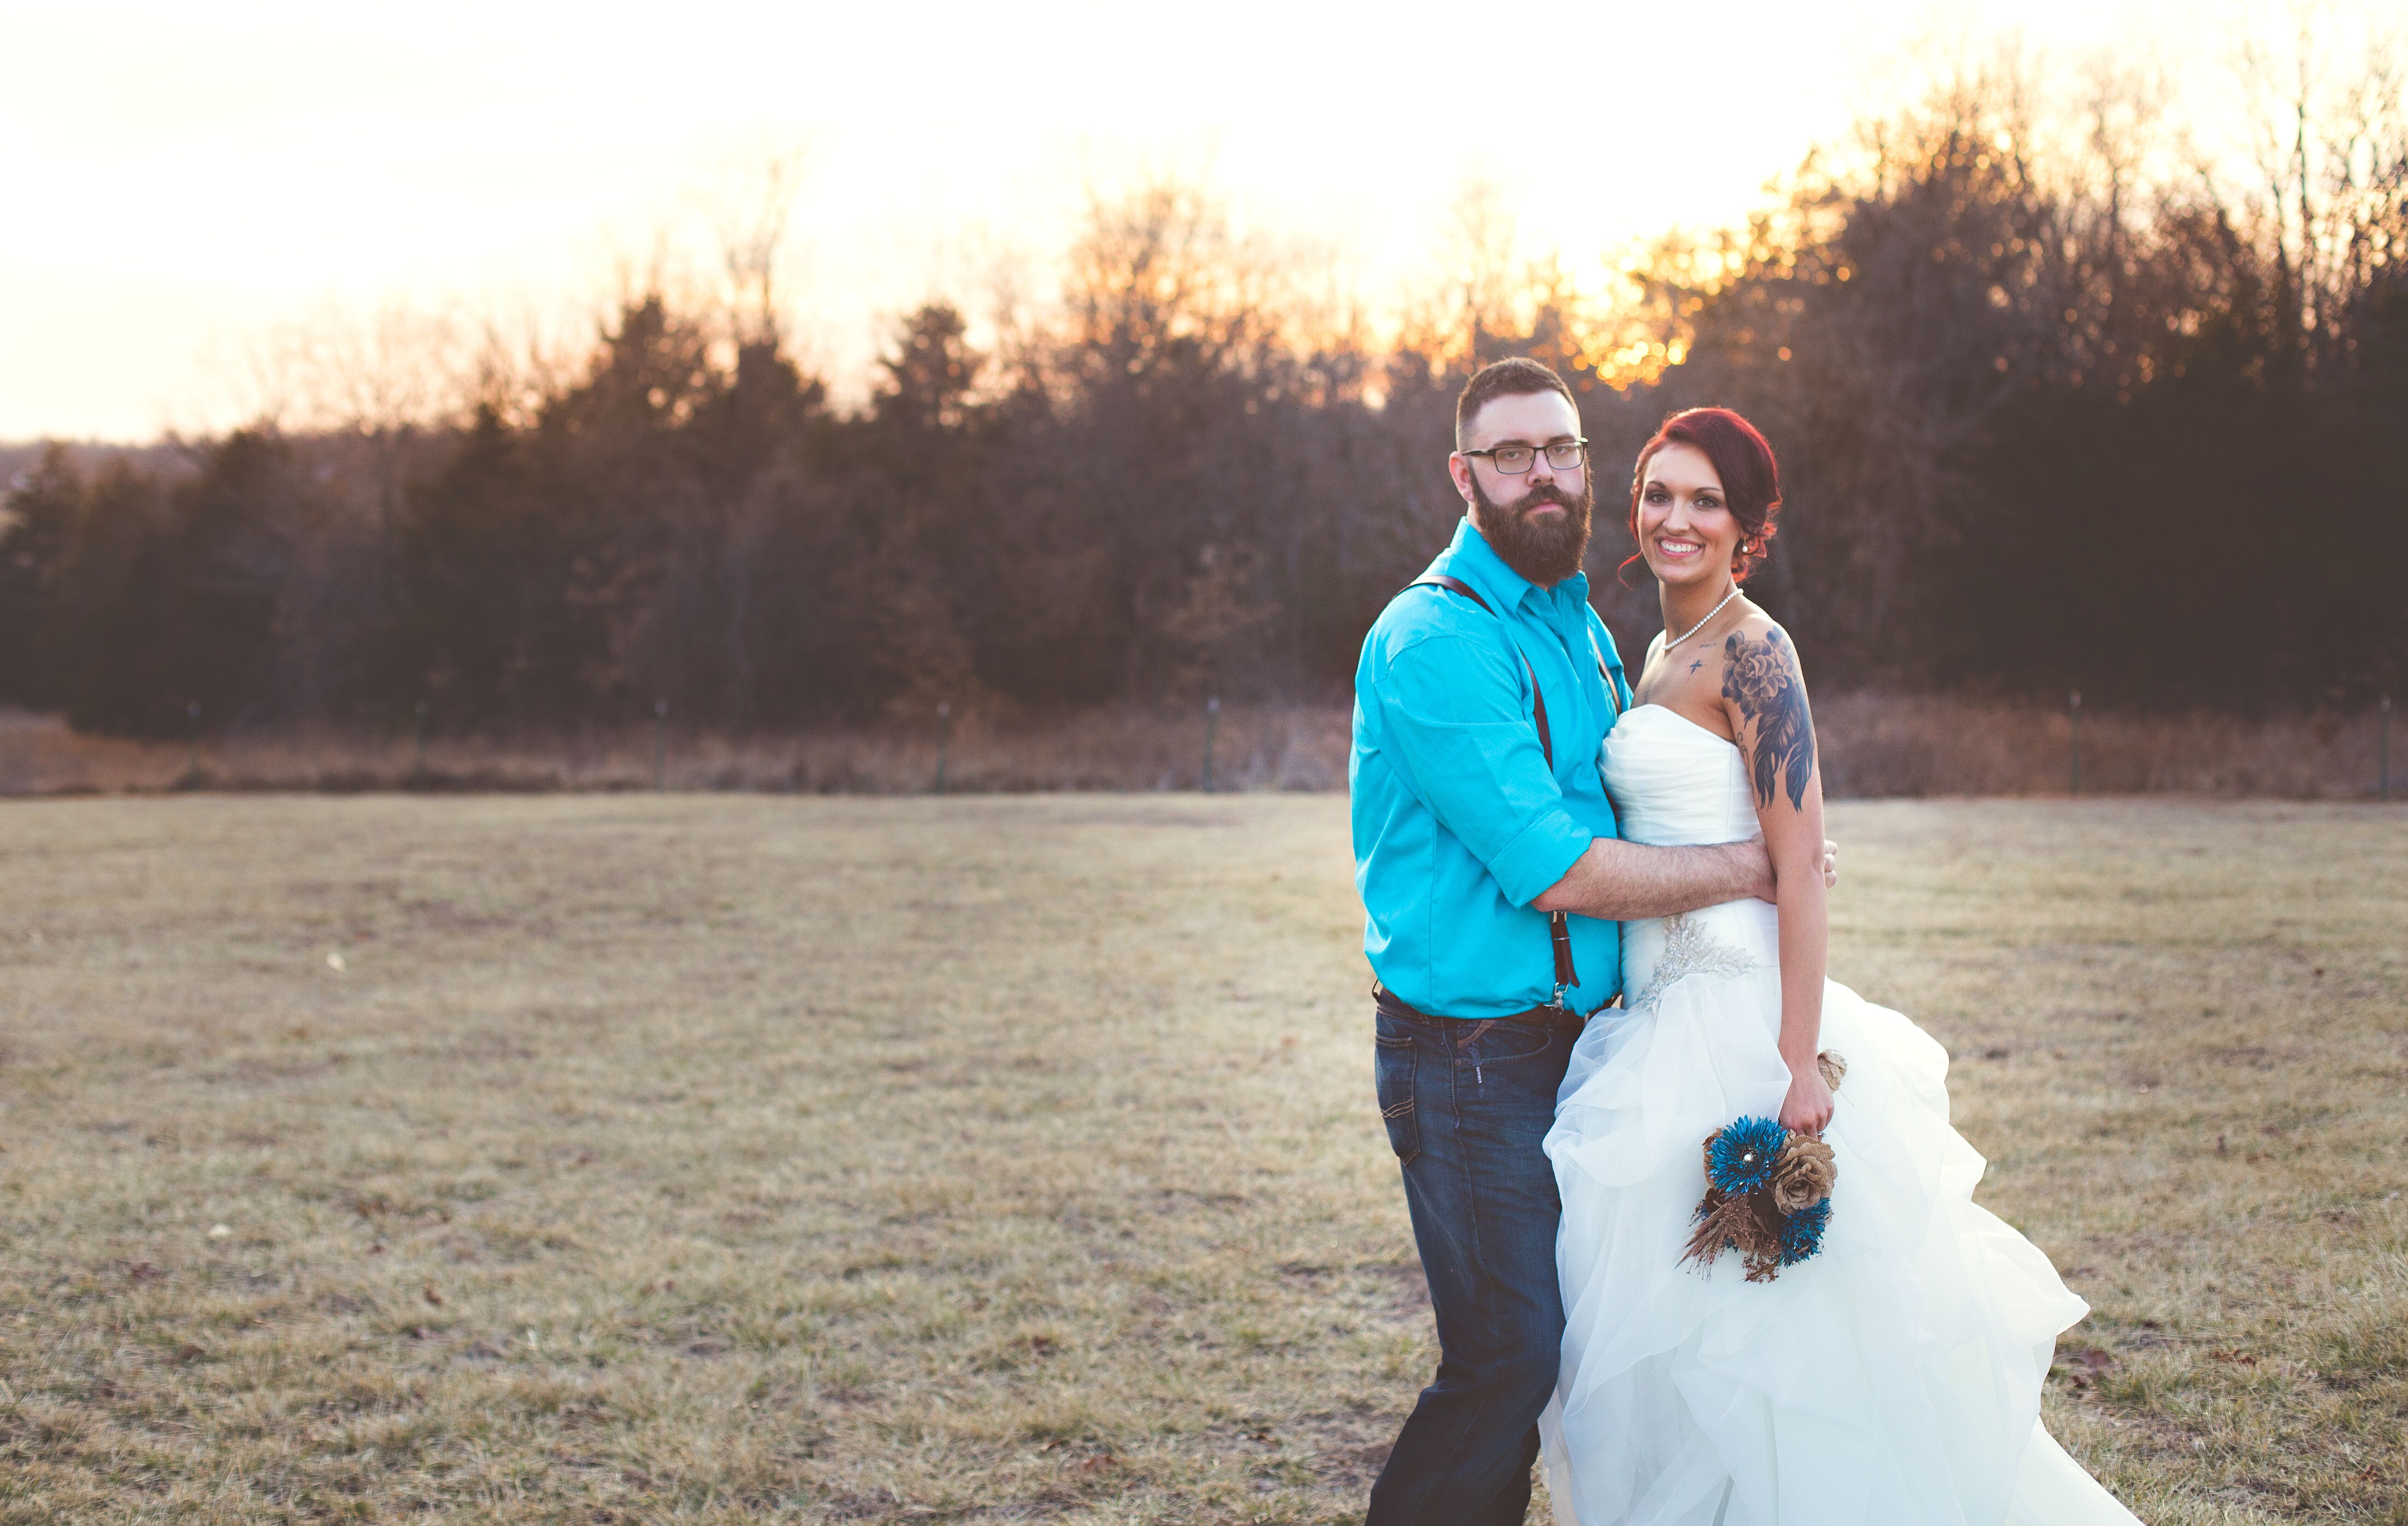 Teal Groom's Shirt with Leather Suspenders